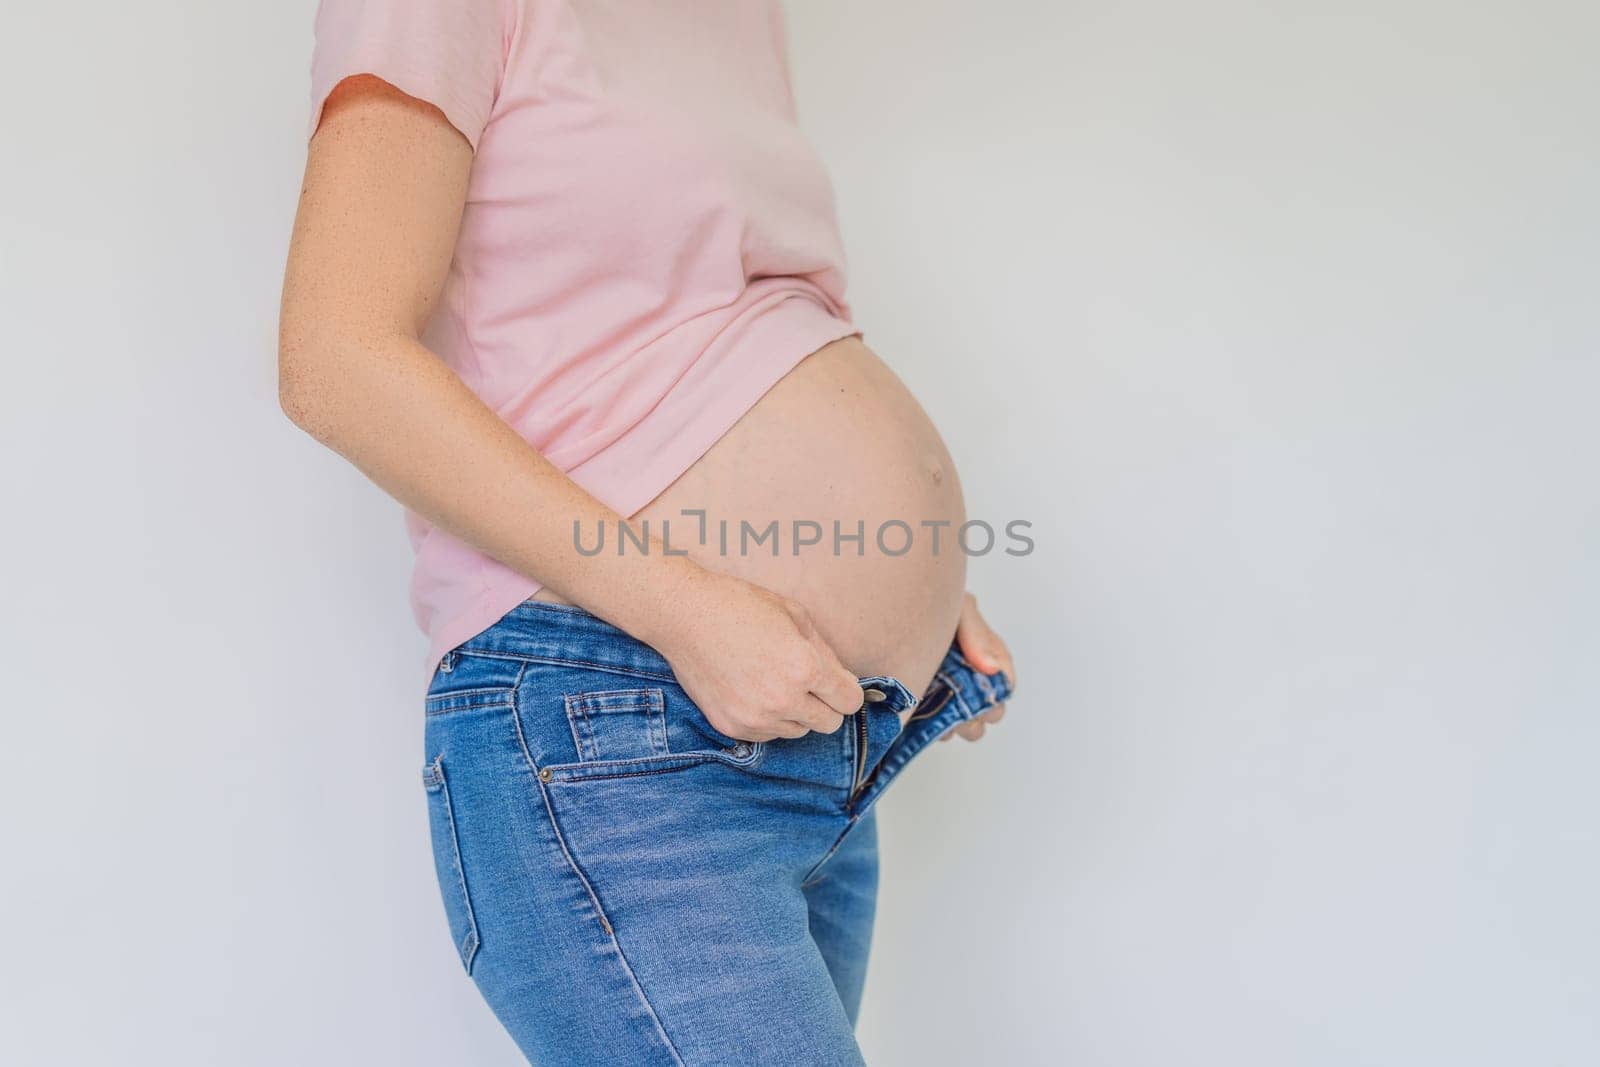 Struggling with jeans. Embrace comfort with maternity wear designed for your growing belly.